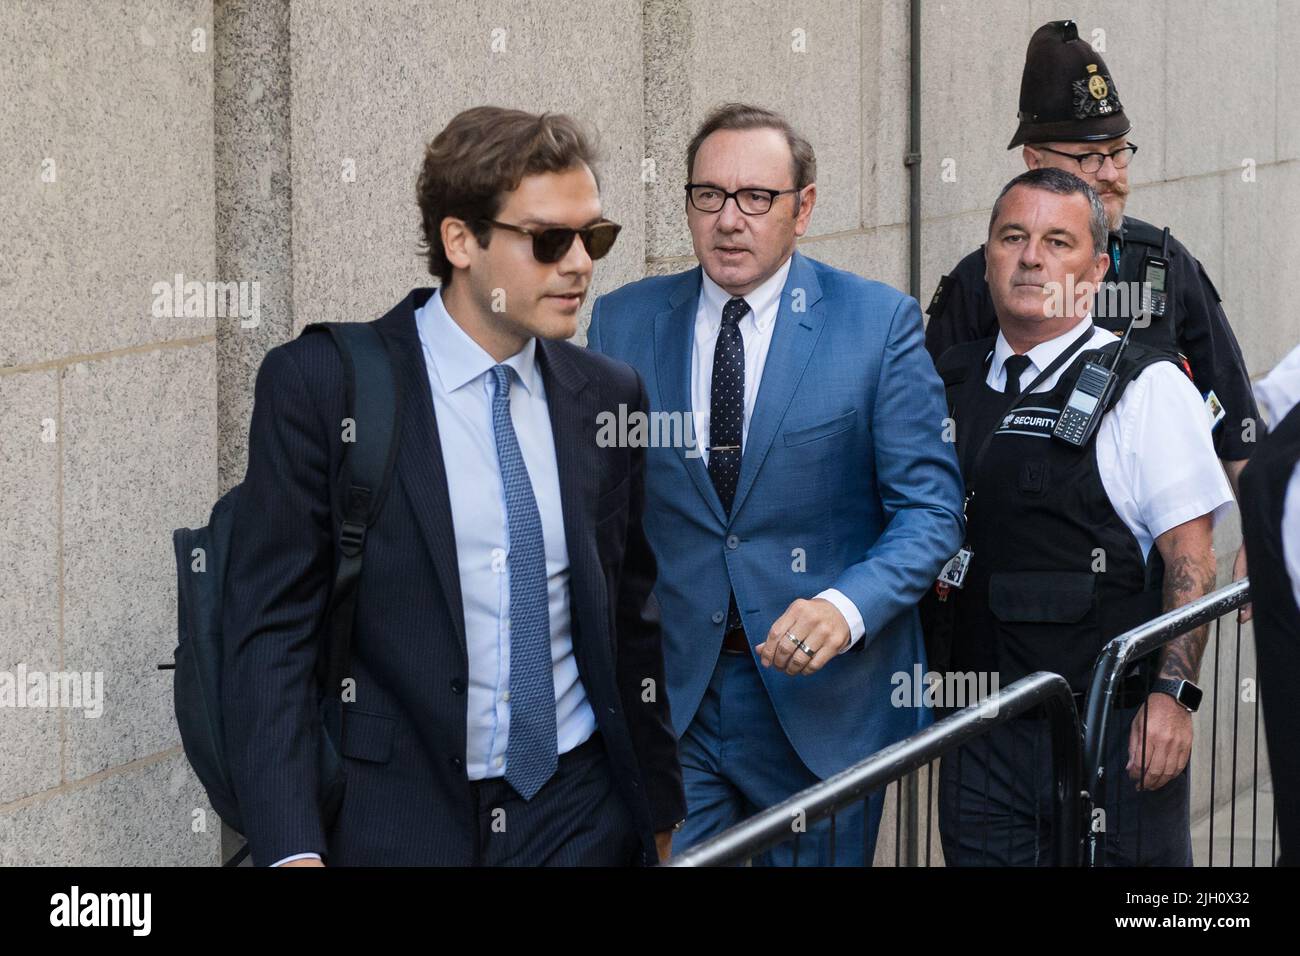 London, UK. 14th July, 2022. US actor Kevin Spacey arrives at the Old Bailey for the plea and trial preparation hearing over four charges of sexual offences against three men. The Oscar-winning actor is expected to plead not guilty to the charges related to the offences which allegedly took place in London and Gloucestershire between 2005 and 2013 while Mr. Spacey was the artistic director at the Old Vic theatre. Credit: Wiktor Szymanowicz/Alamy Live News Stock Photo